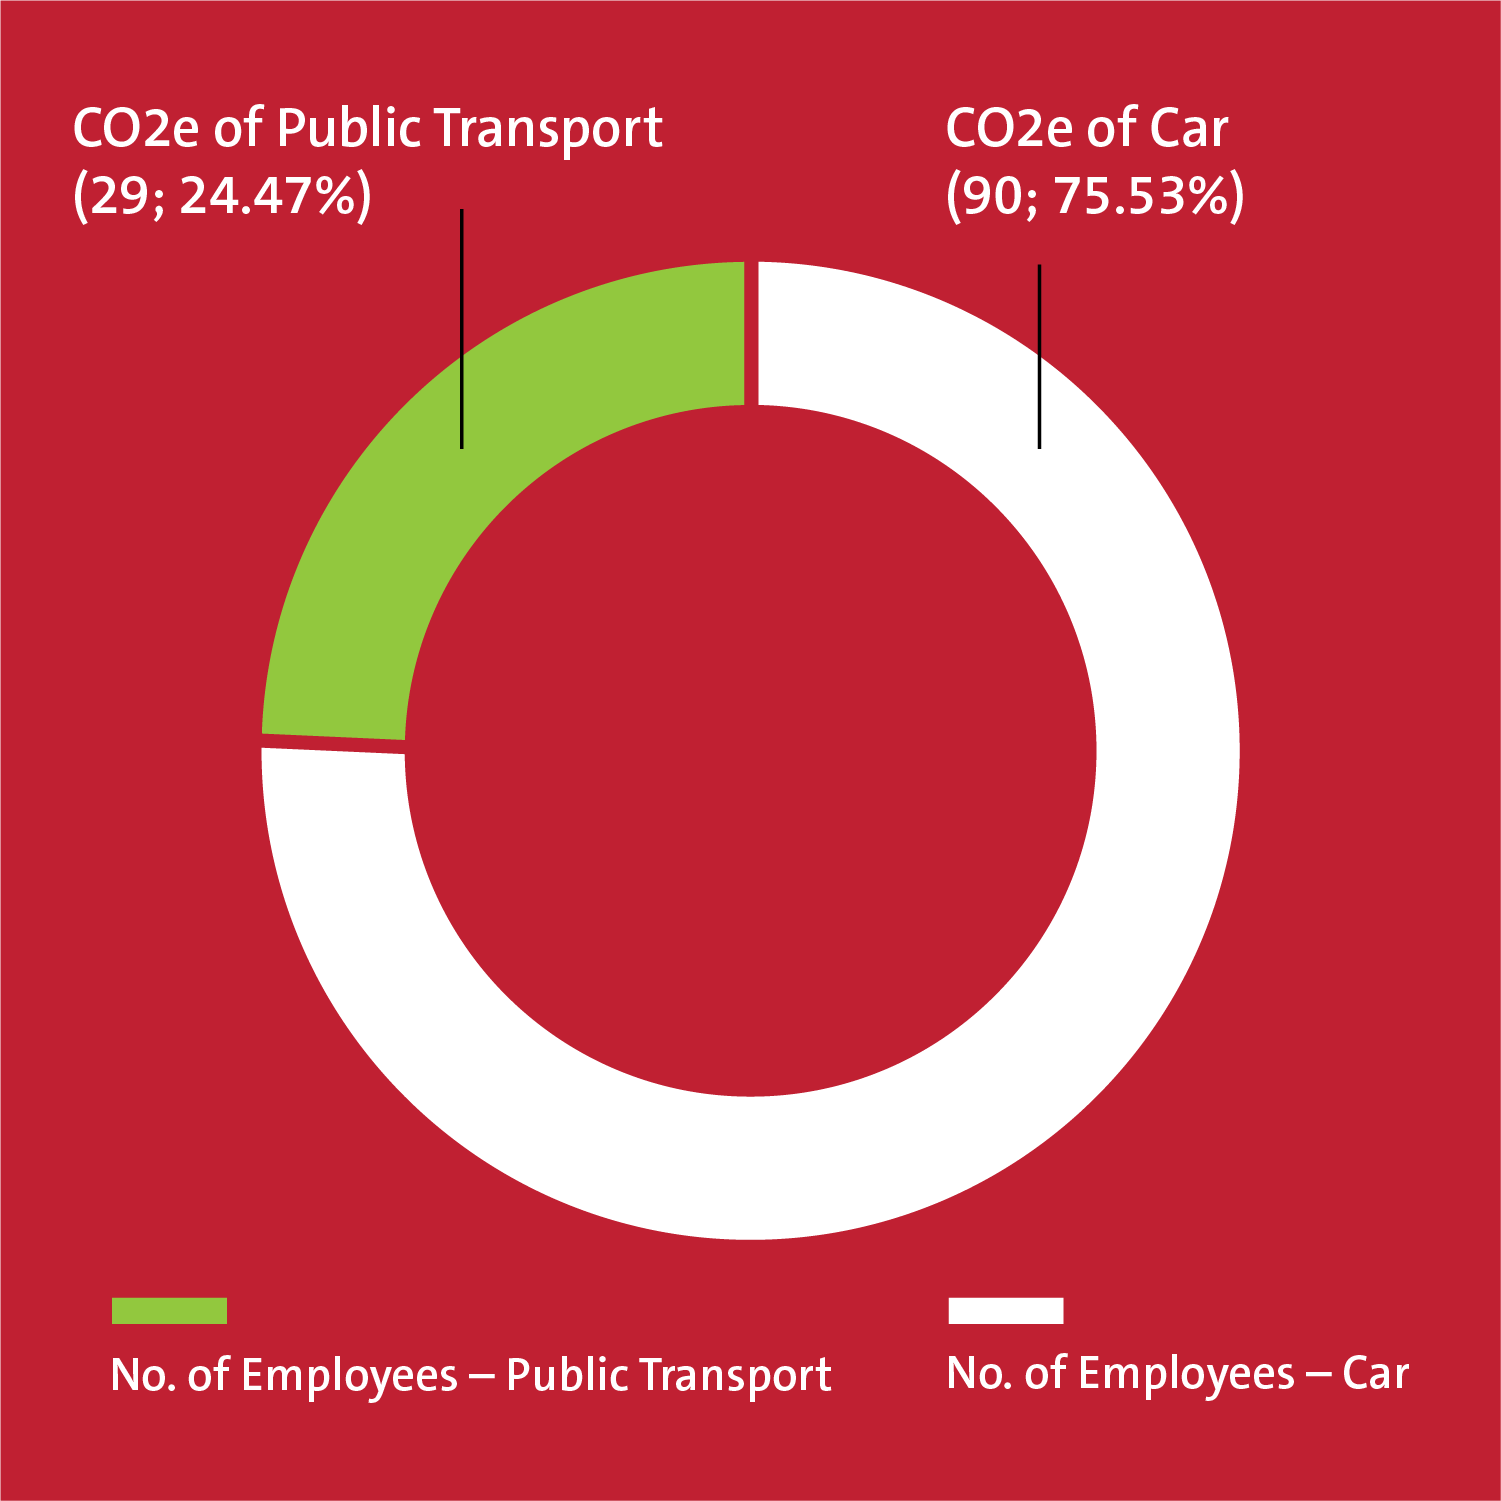 24.47% of employee CO2 was produced by public transport, 75.53% by car